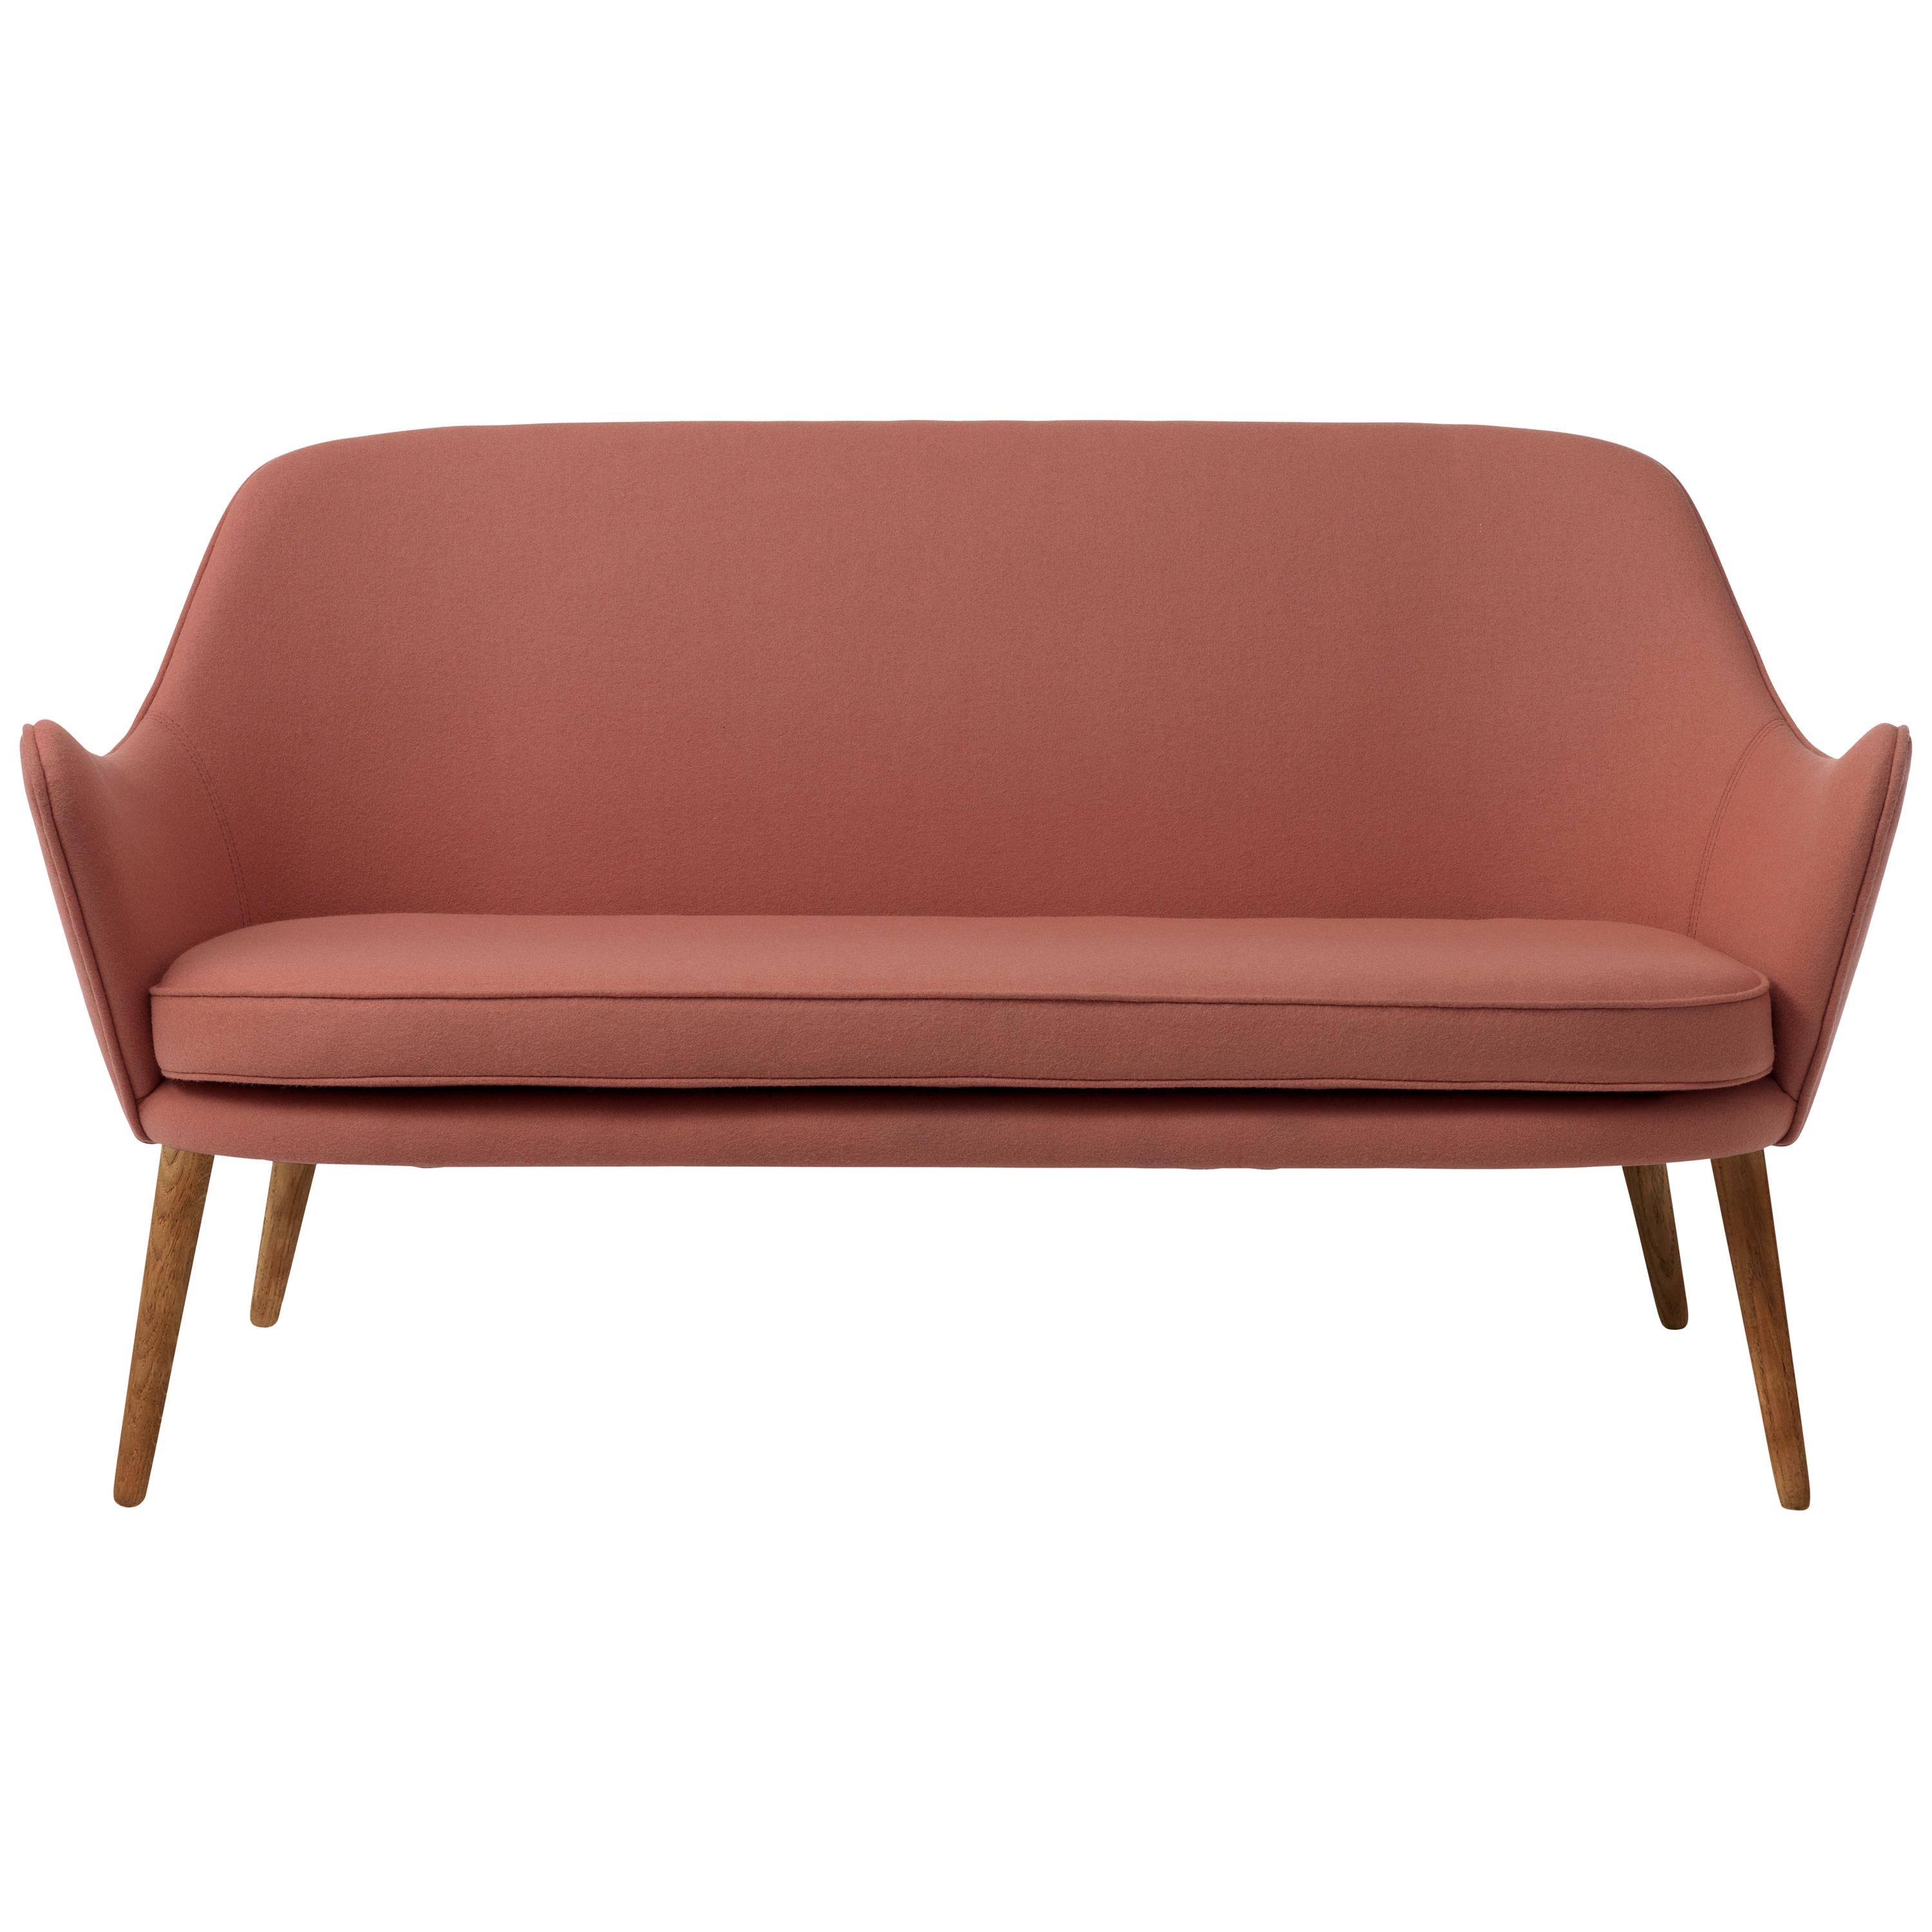 For Sale: Gray (Barnum 2) Dwell 2-Seat Sofa, by Hans Olsen from Warm Nordic